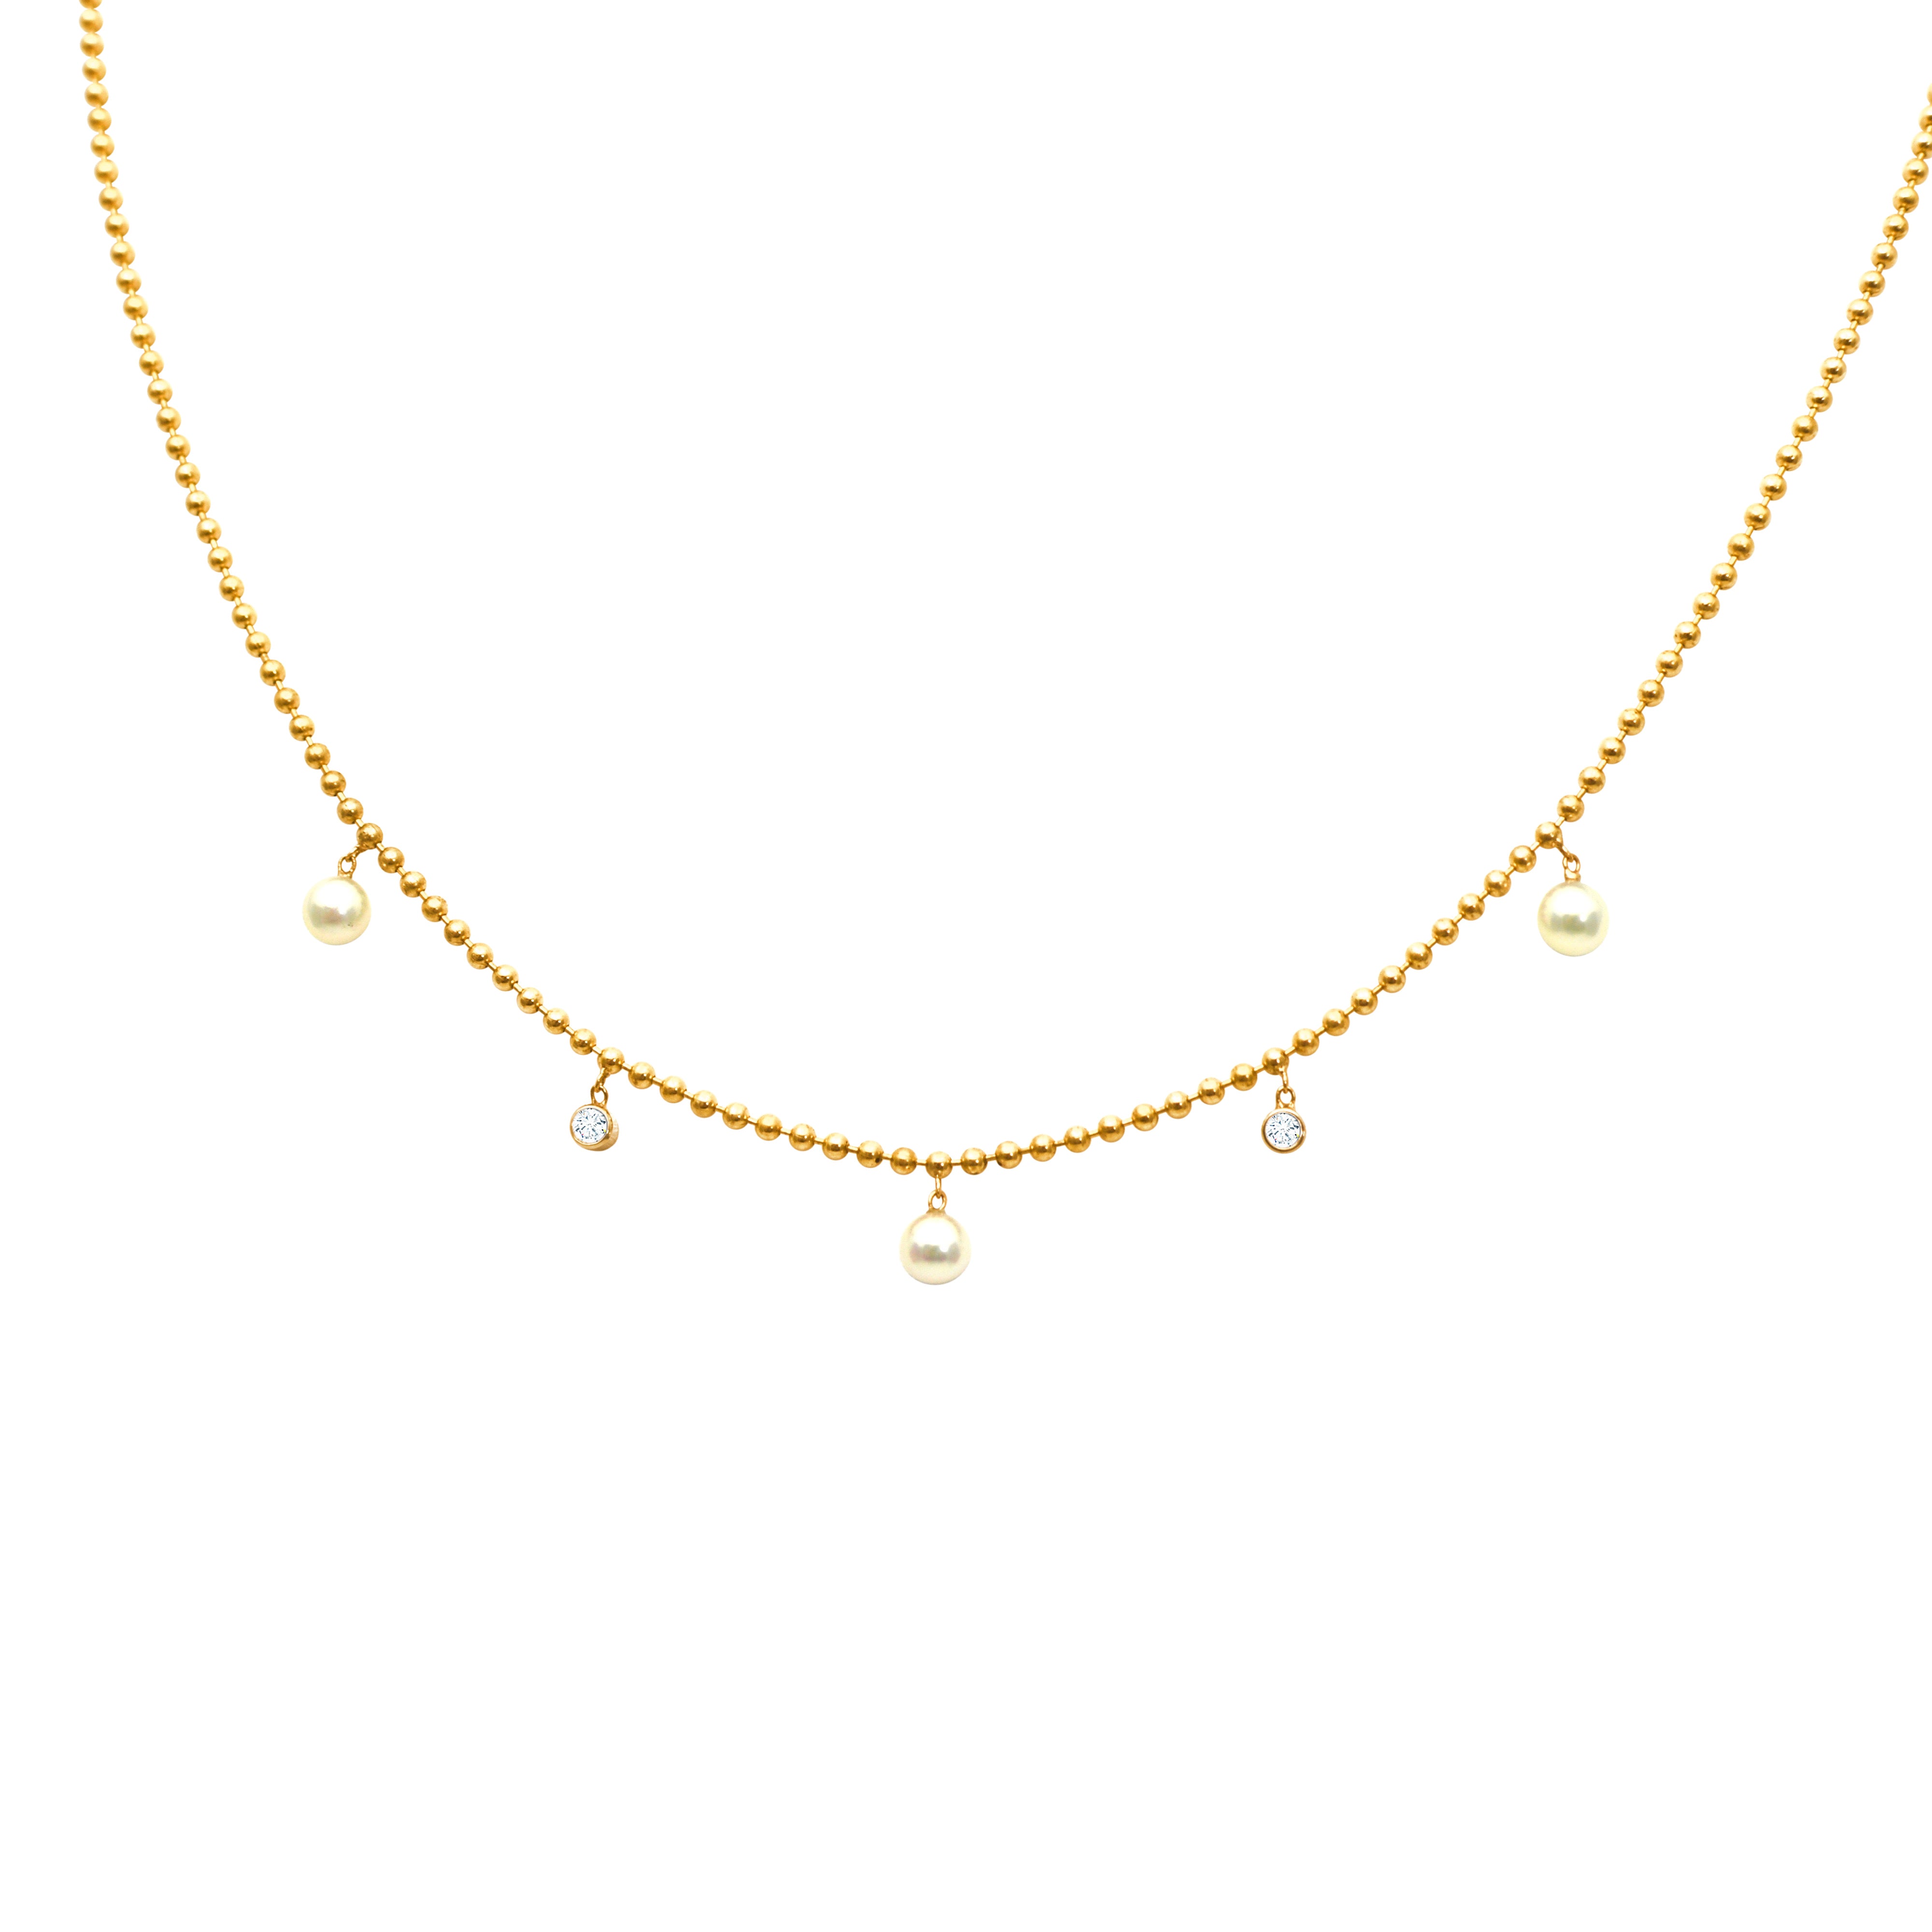 DANGLING PEARL AND BEZEL SET DIAMOND NECKLACE, 14K YELLOW GOLD